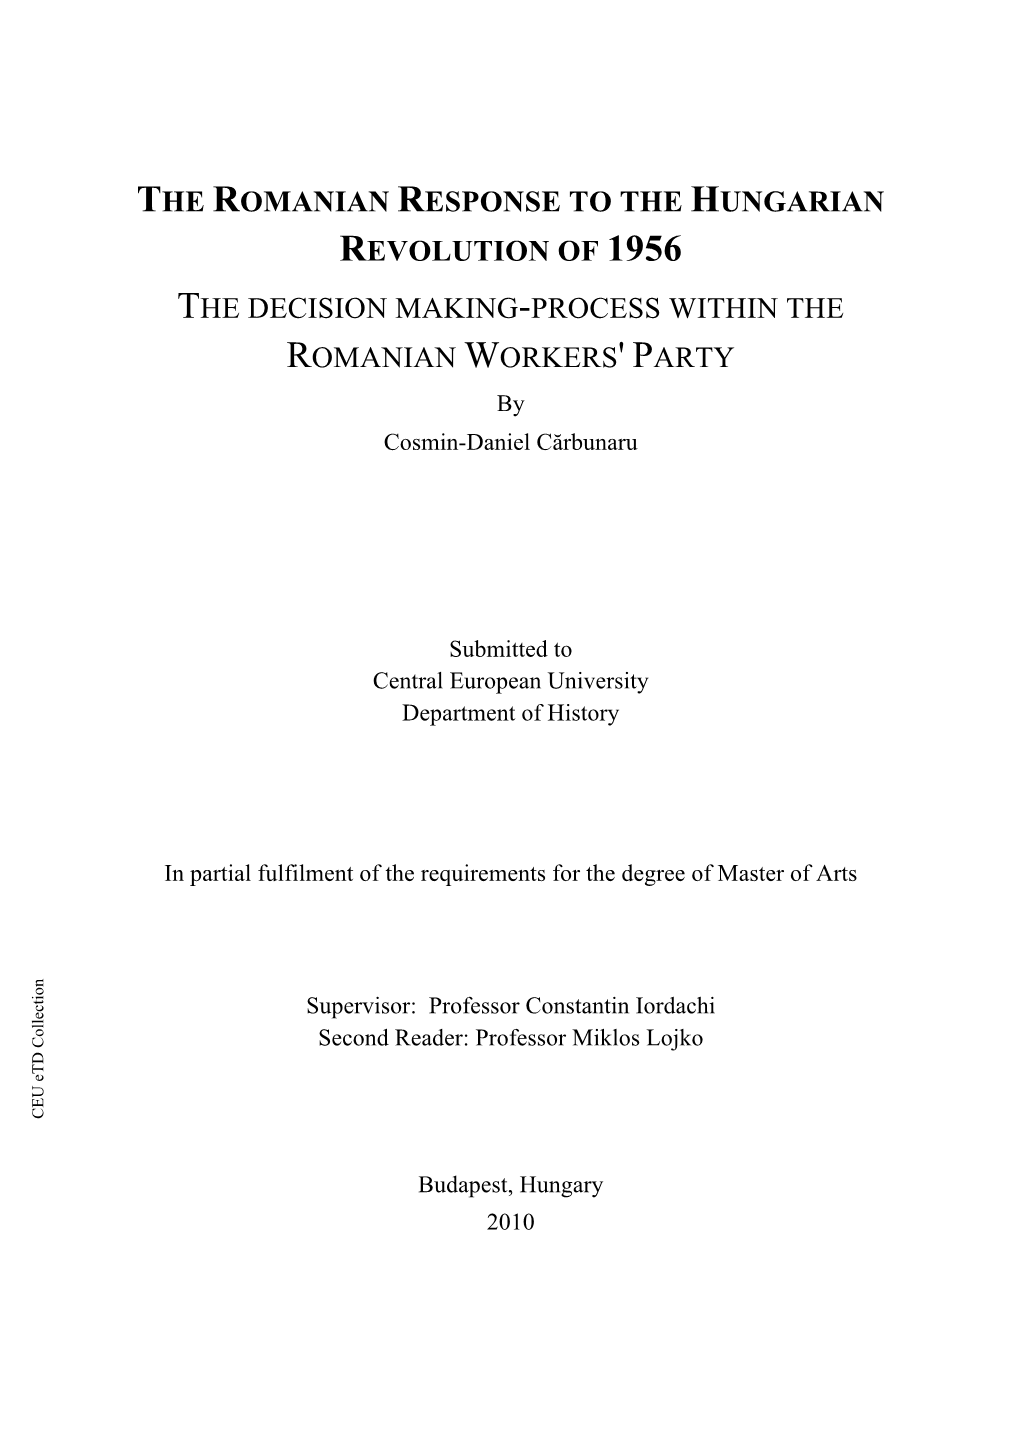 The Romanian Response to the Hungarian Revolution